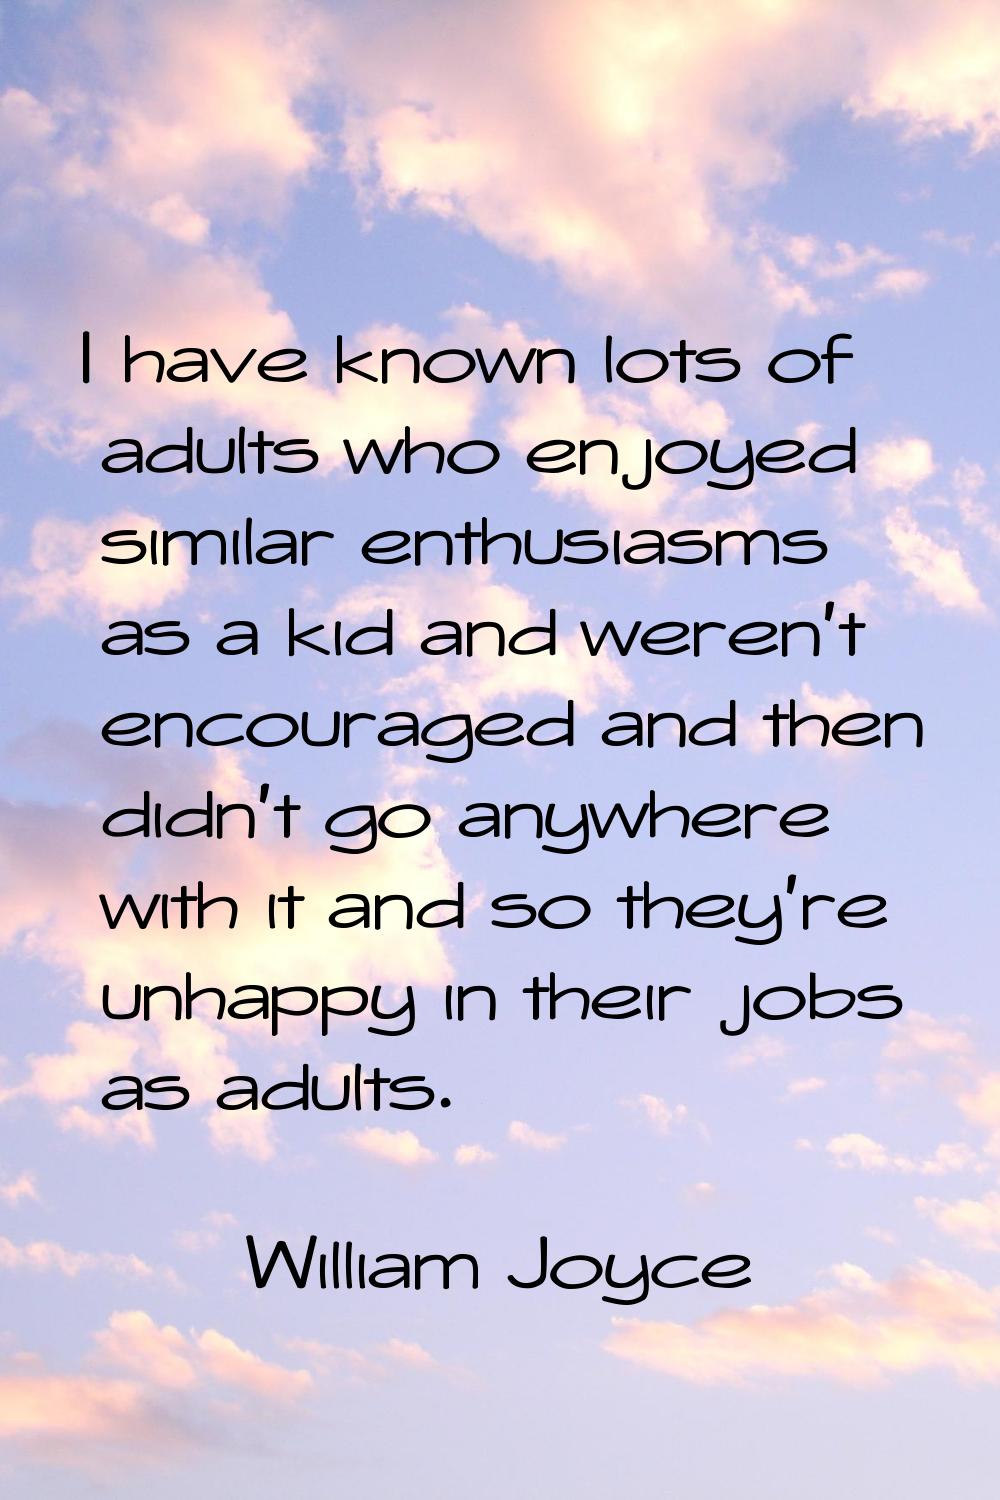 I have known lots of adults who enjoyed similar enthusiasms as a kid and weren't encouraged and the